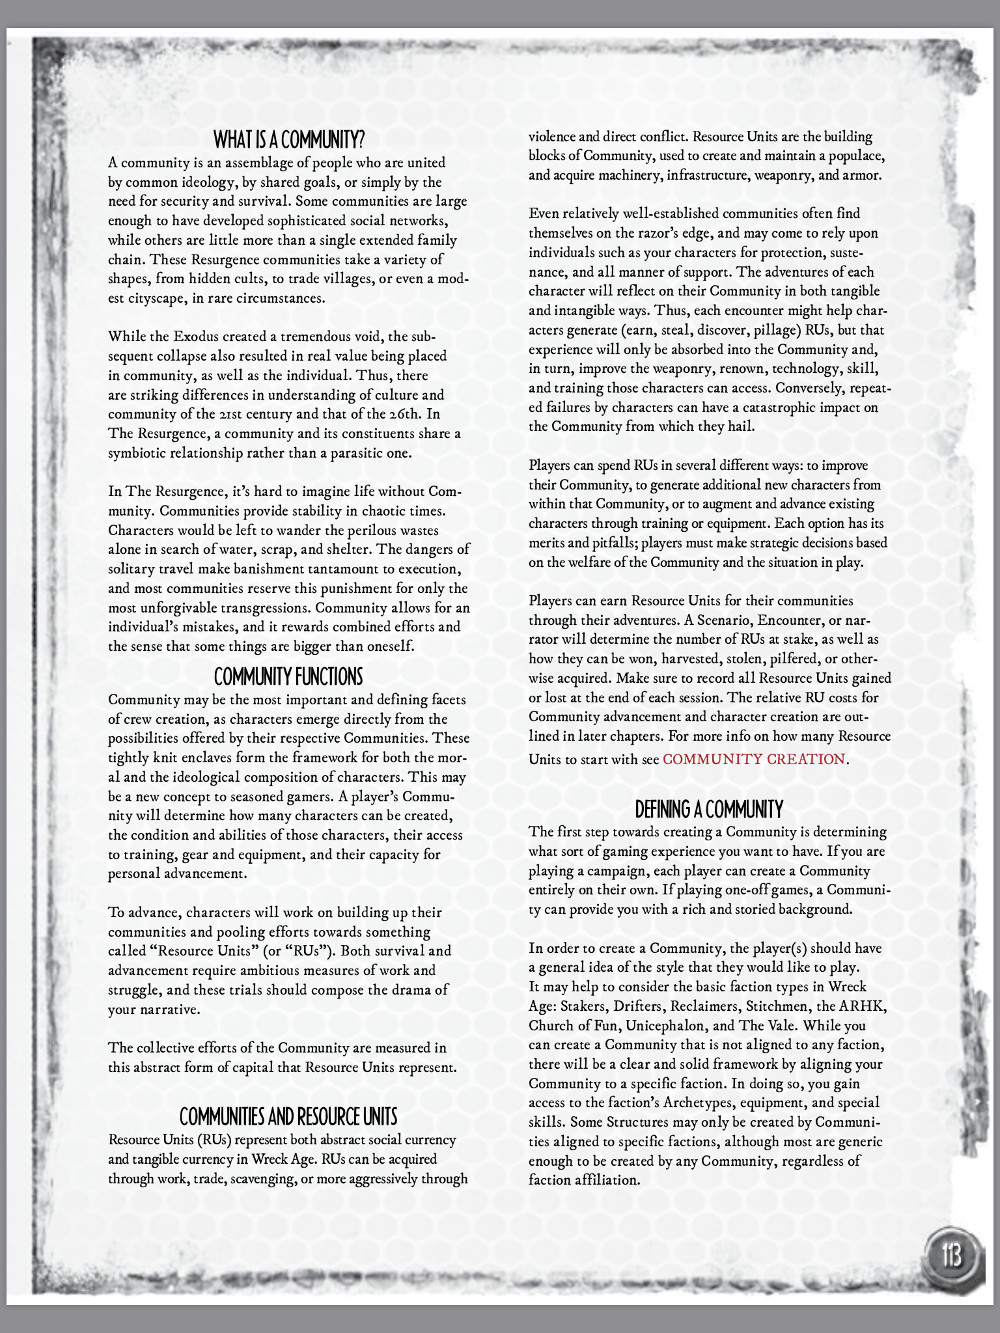 Wreck Age 2nd Edition Skirmish Rules Sample Page - In the Book